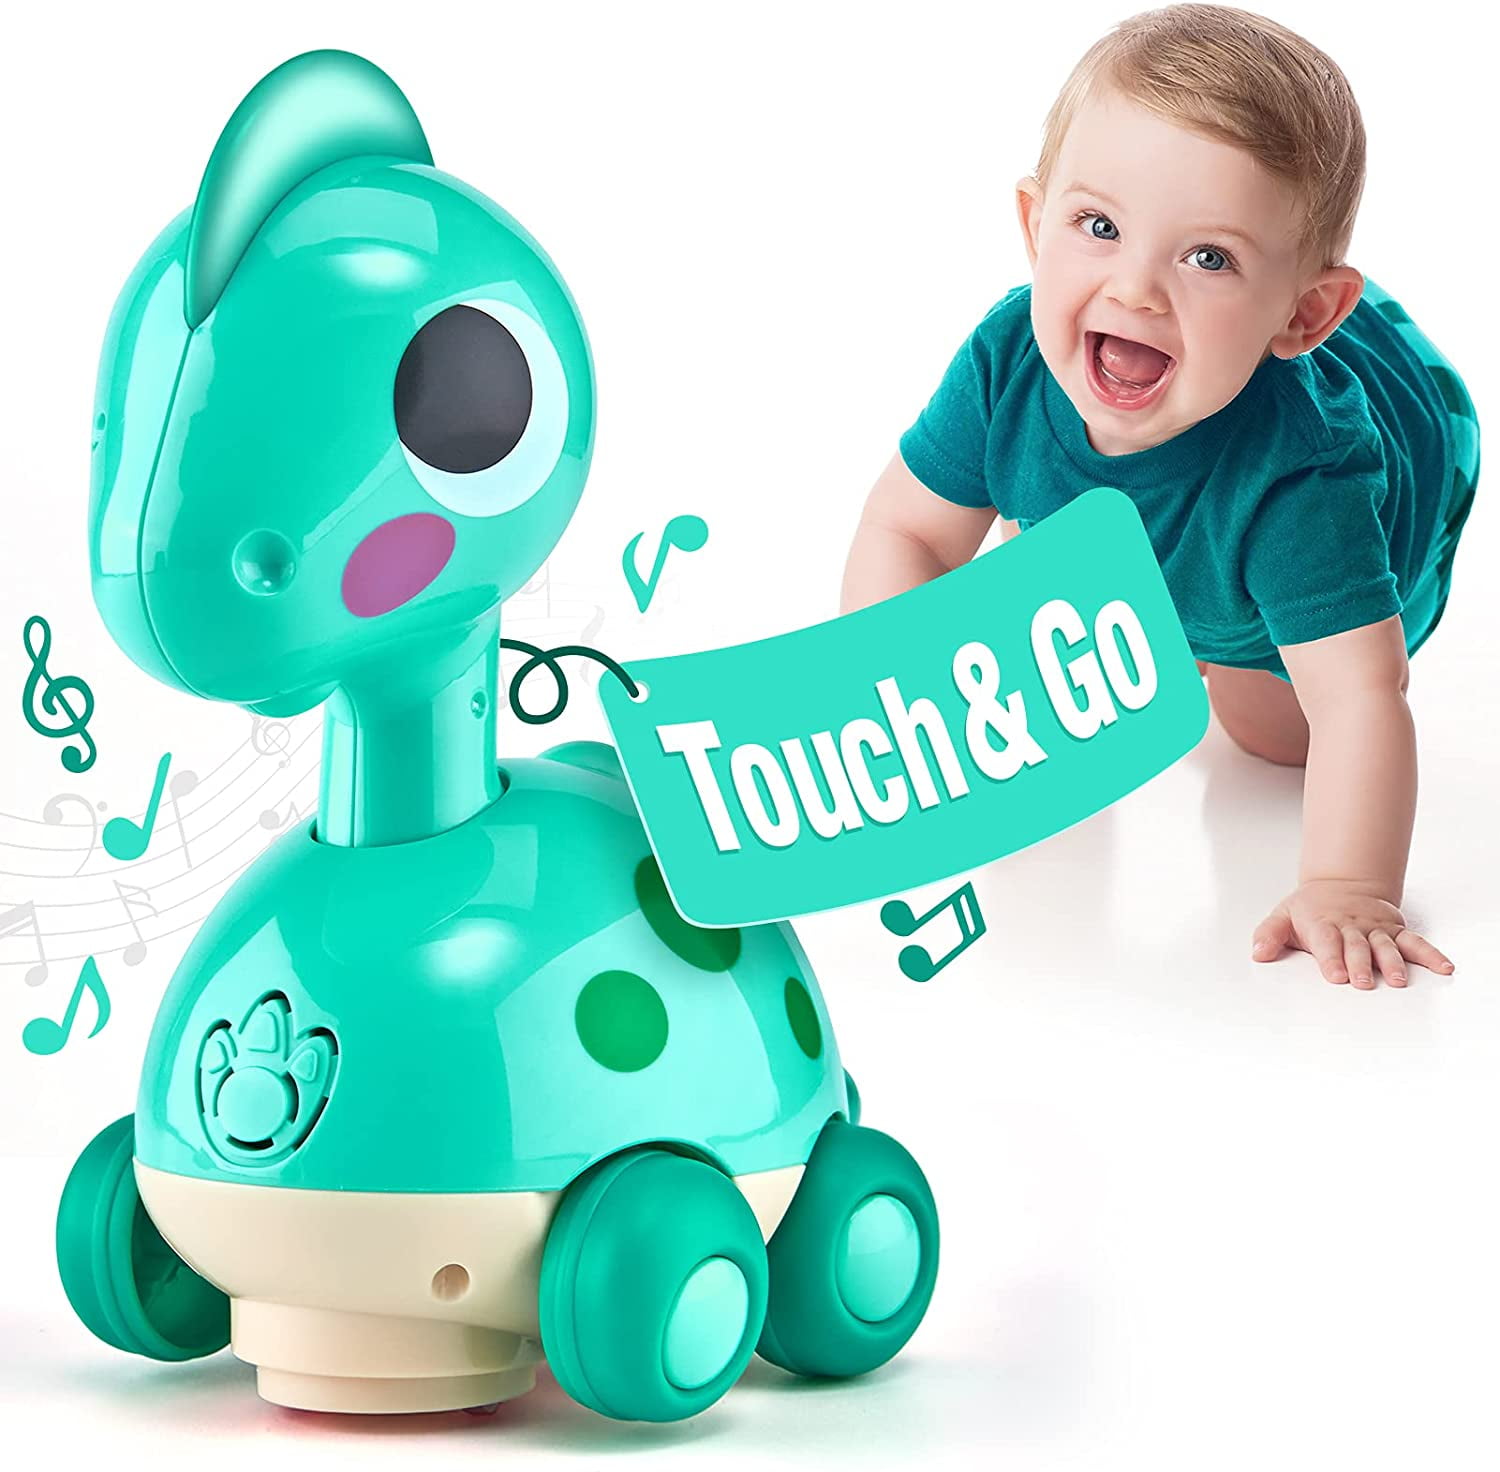 MOONTOY Baby Toys 6 to 12 Months Touch & Go Musical Light Infant Toys